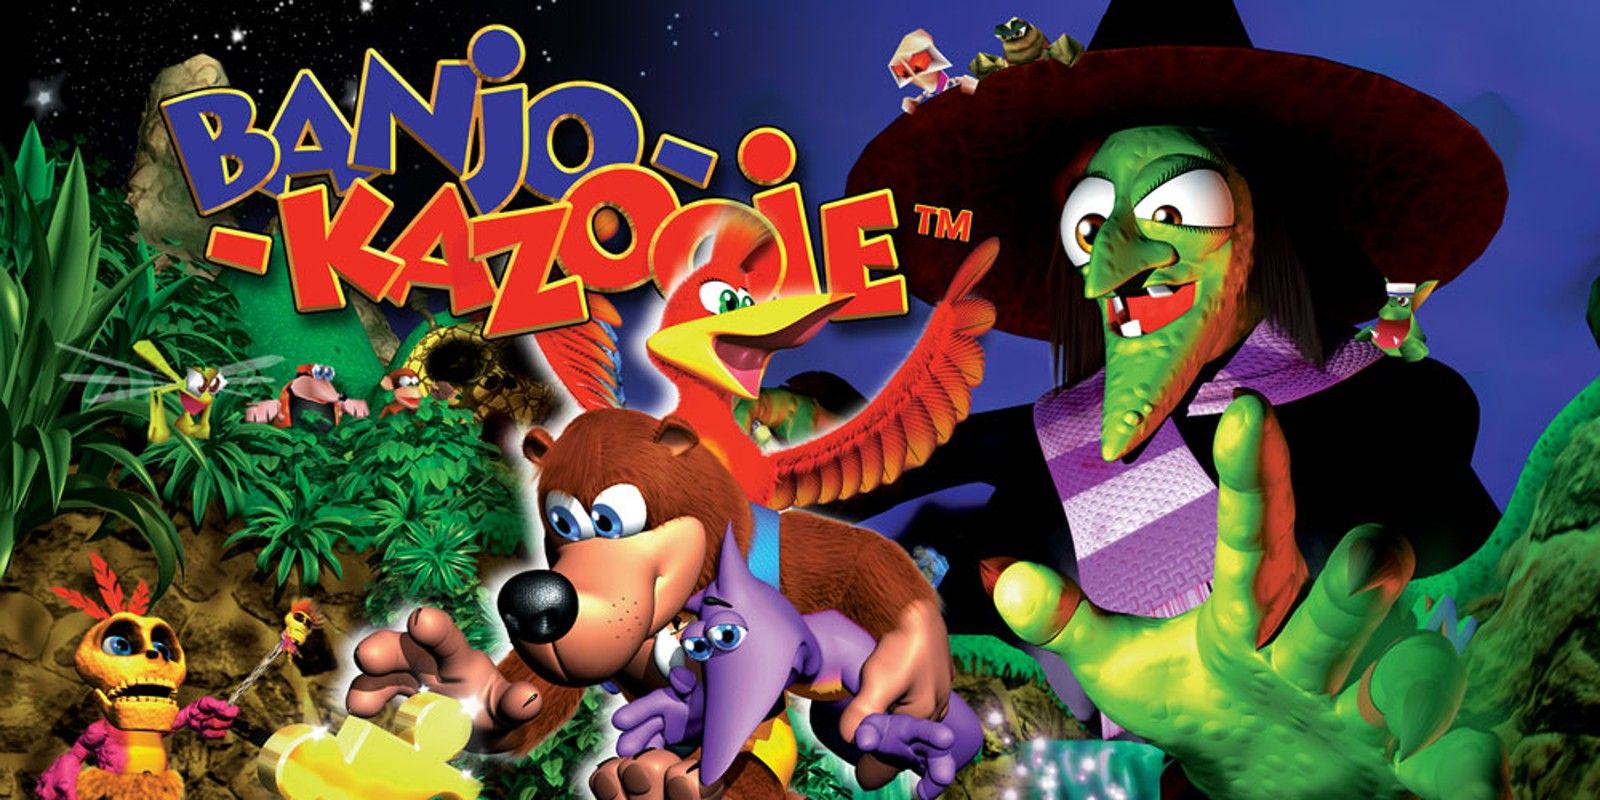 The cover art for Banjo-Kazooie